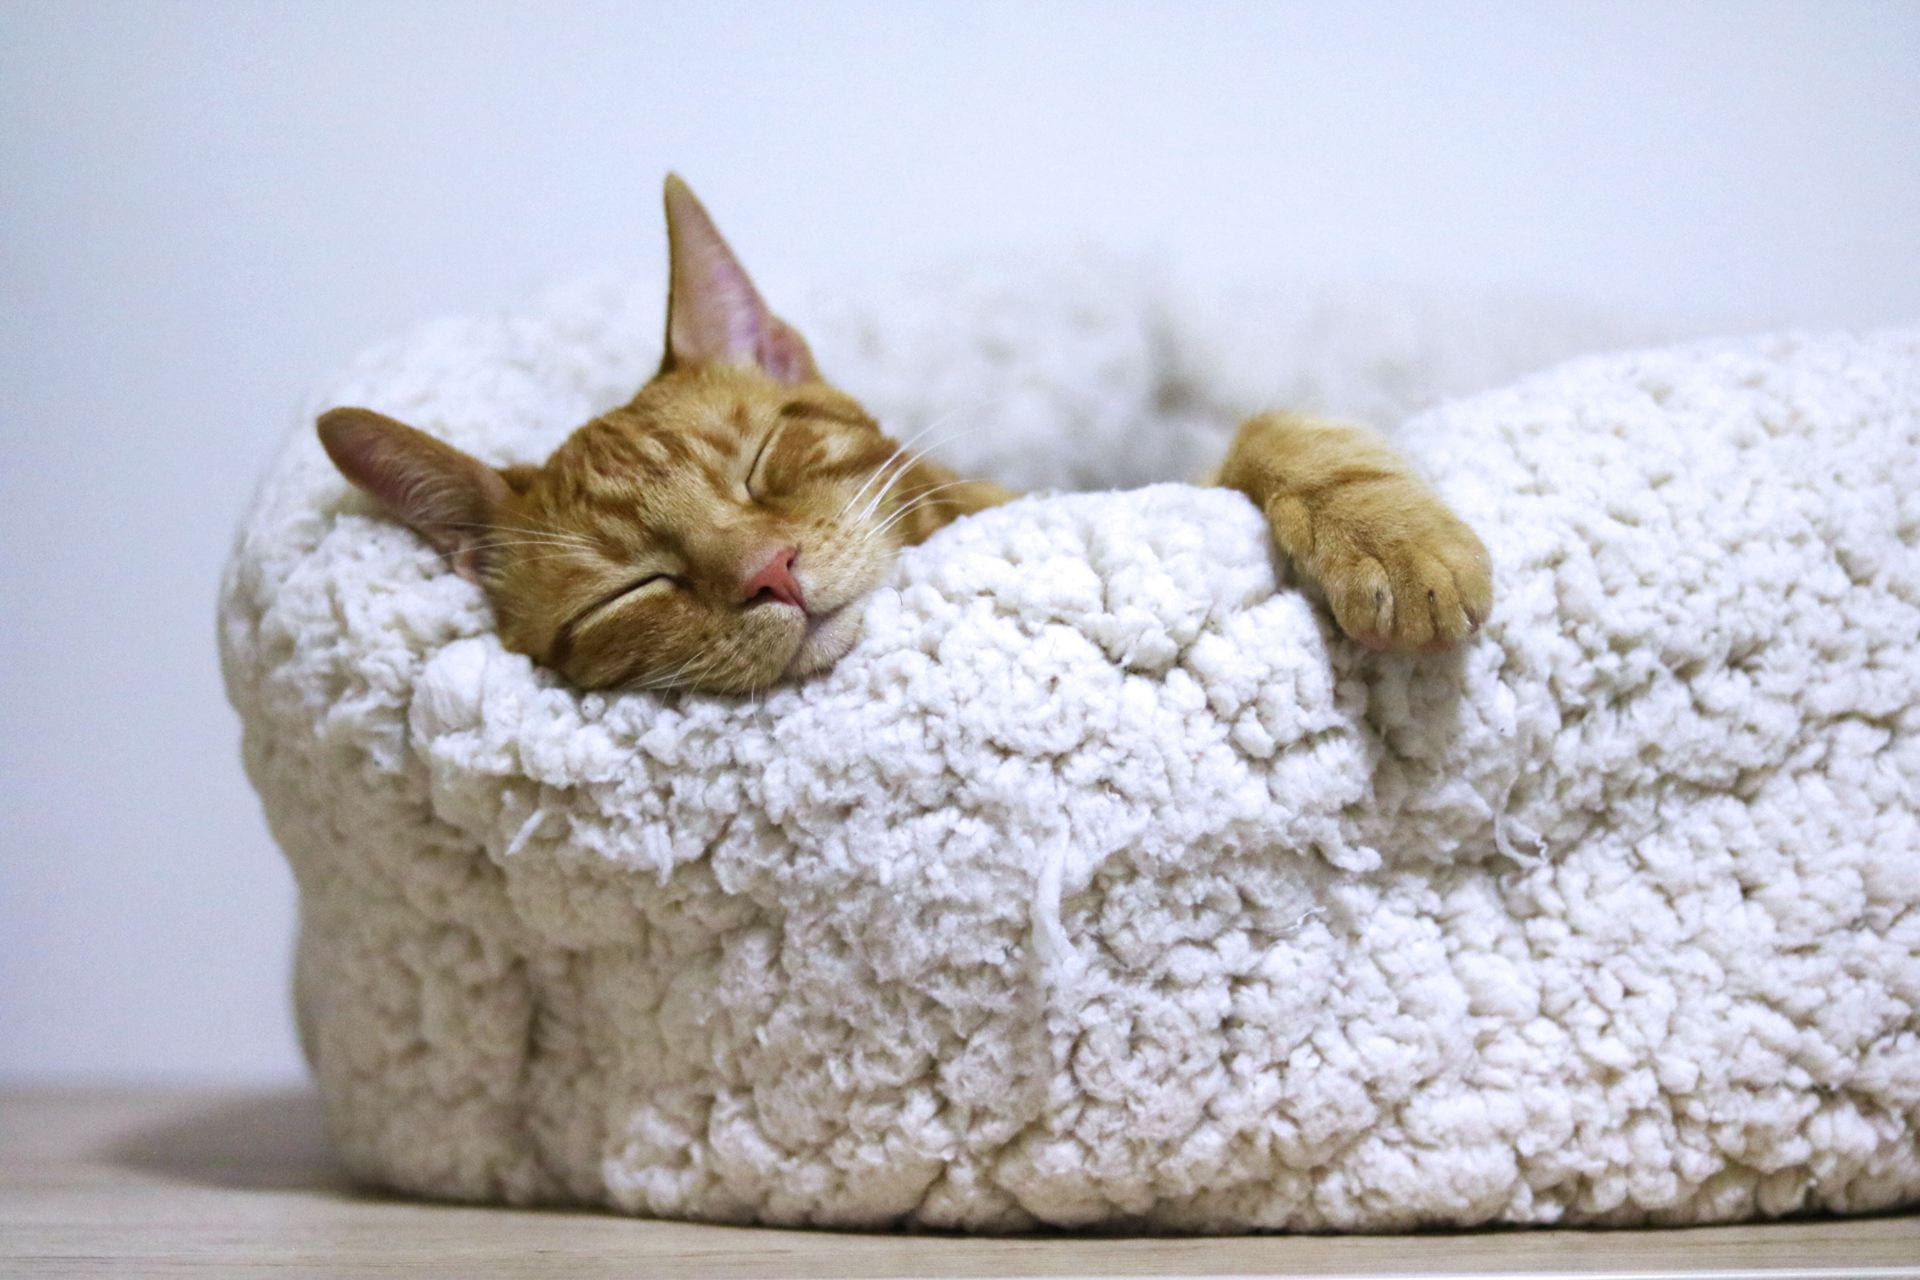 A cat asleep in its bed